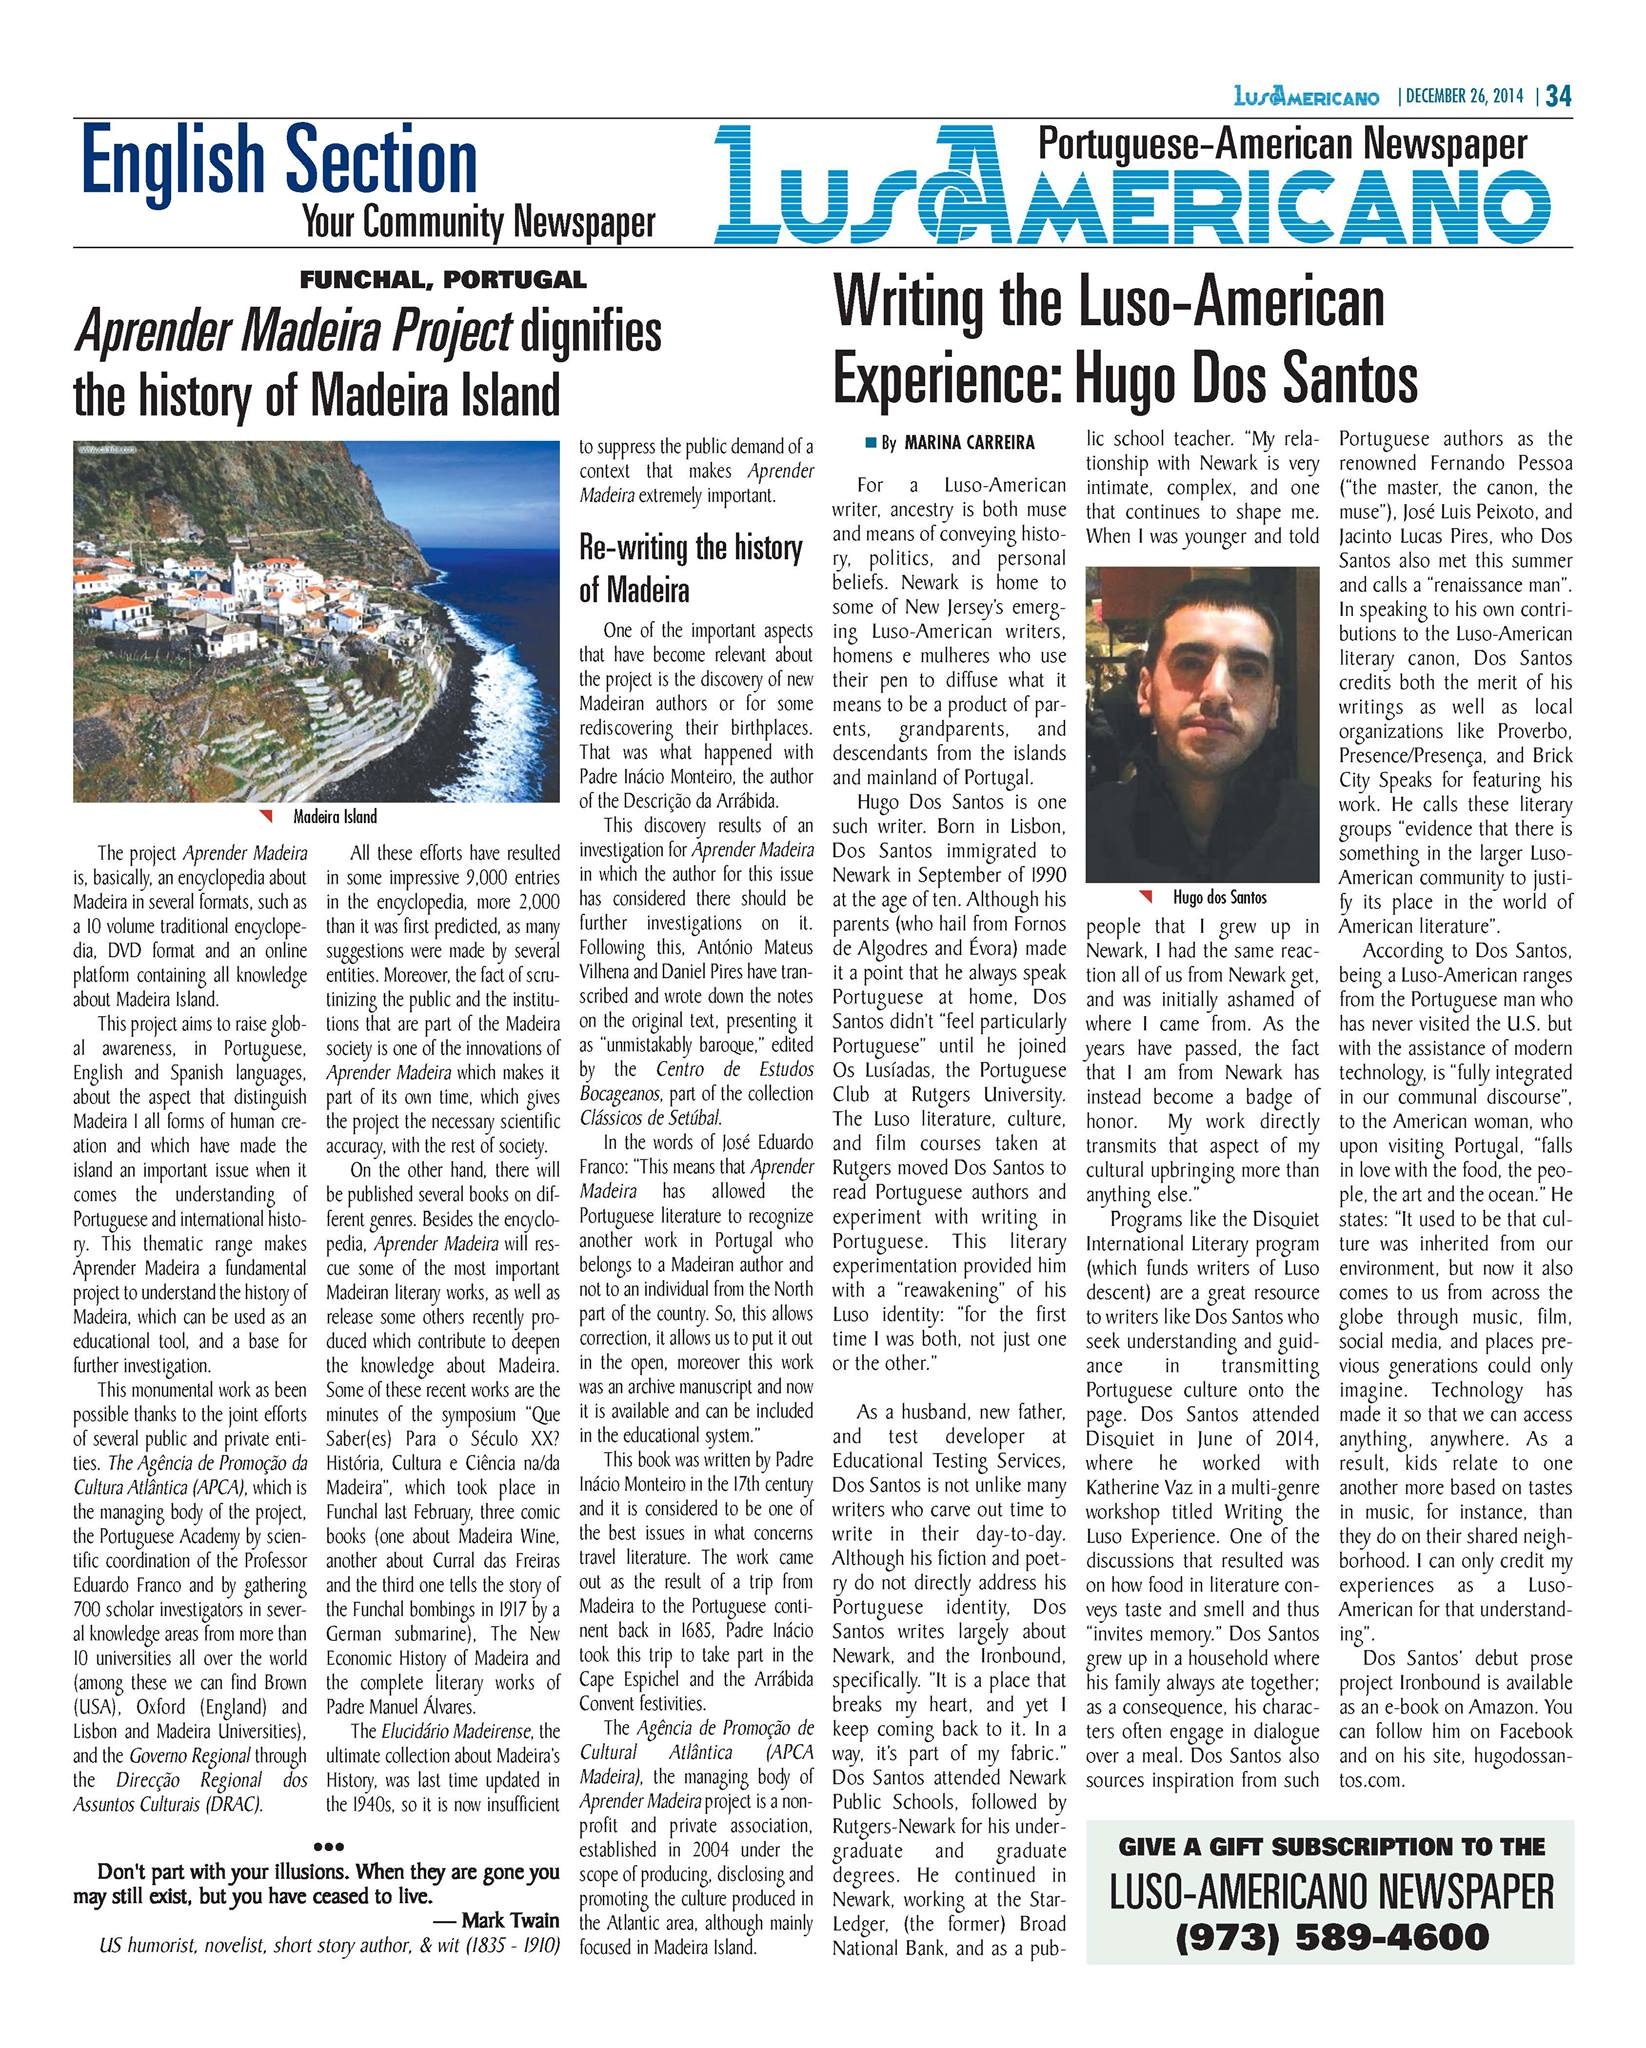 Portuguese Club of Hartford - Front page of the Luso-Americano Newspaper!